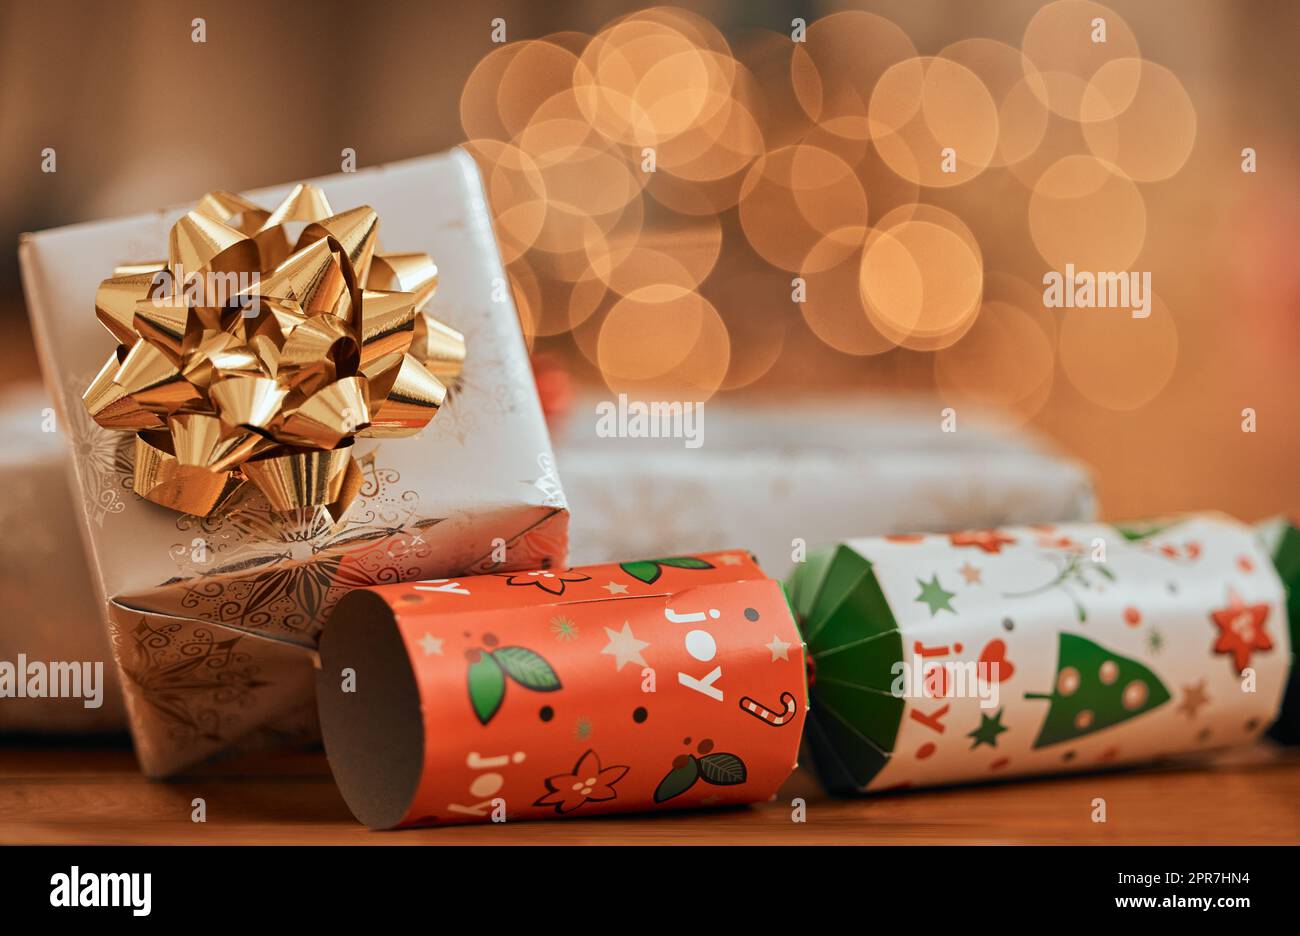 The season where joy is in abundance. Closeup shot of a gift box and a cracker during Christmas. Stock Photo